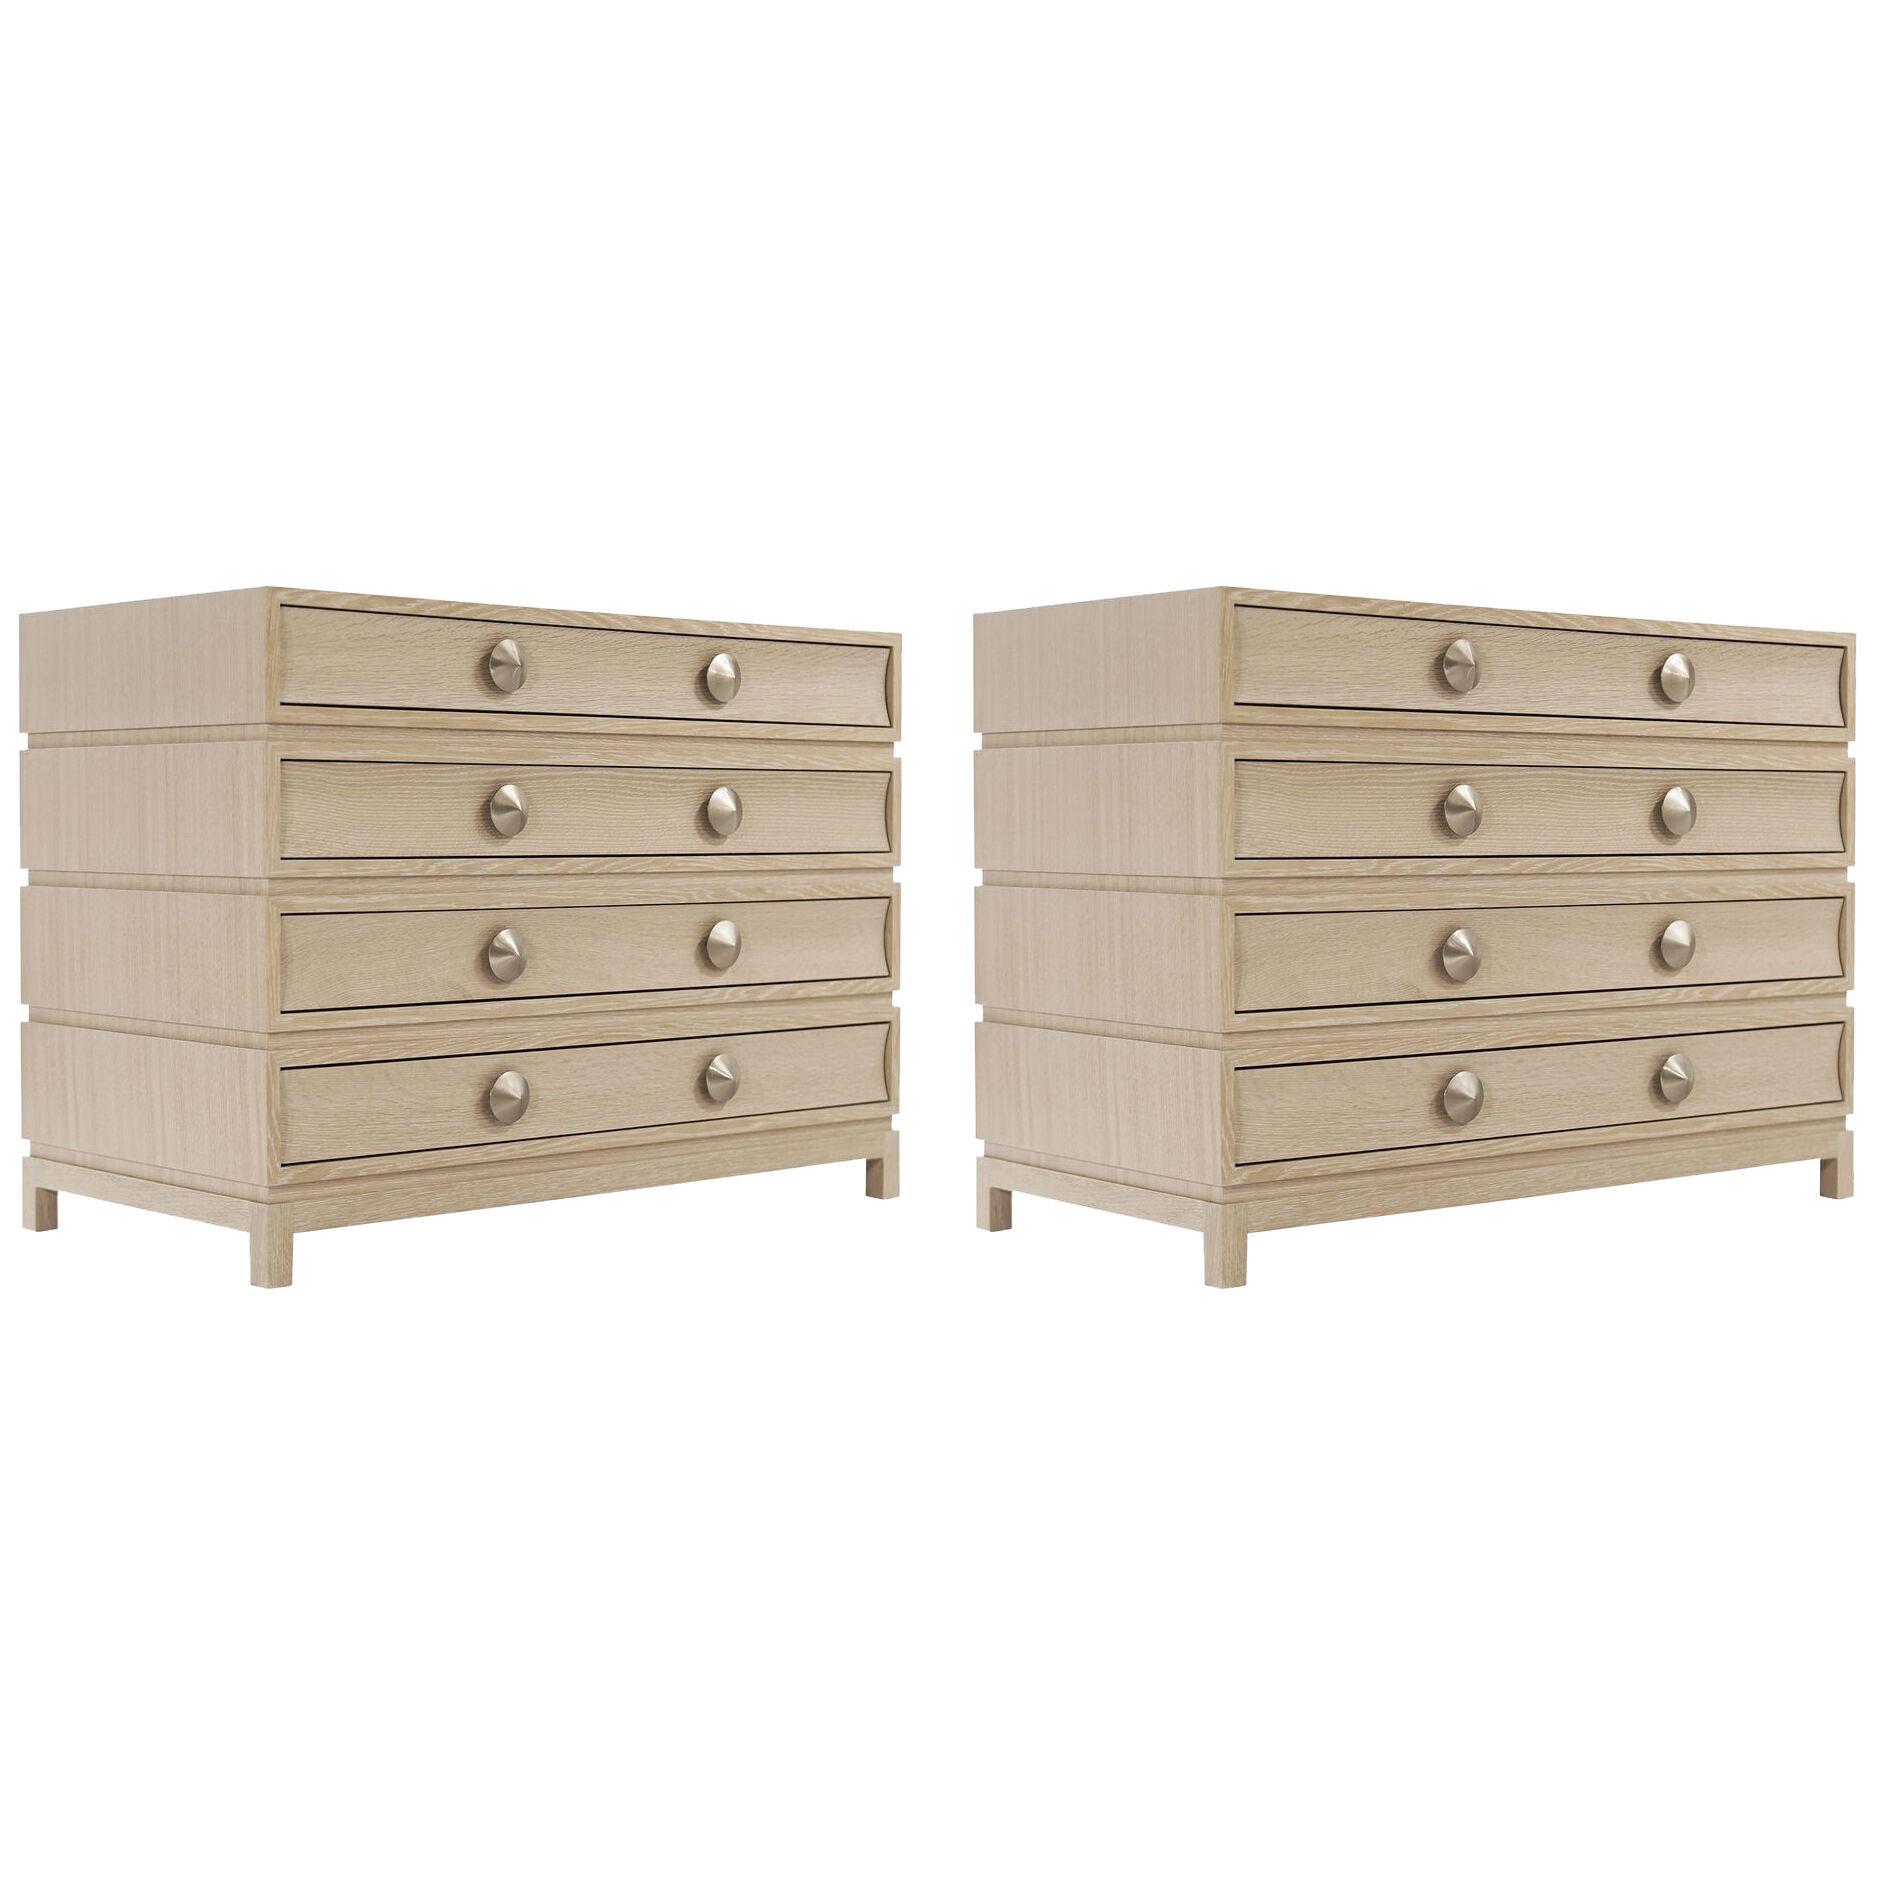 Stacked Commodes in Cerused Oak by Stamford Modern